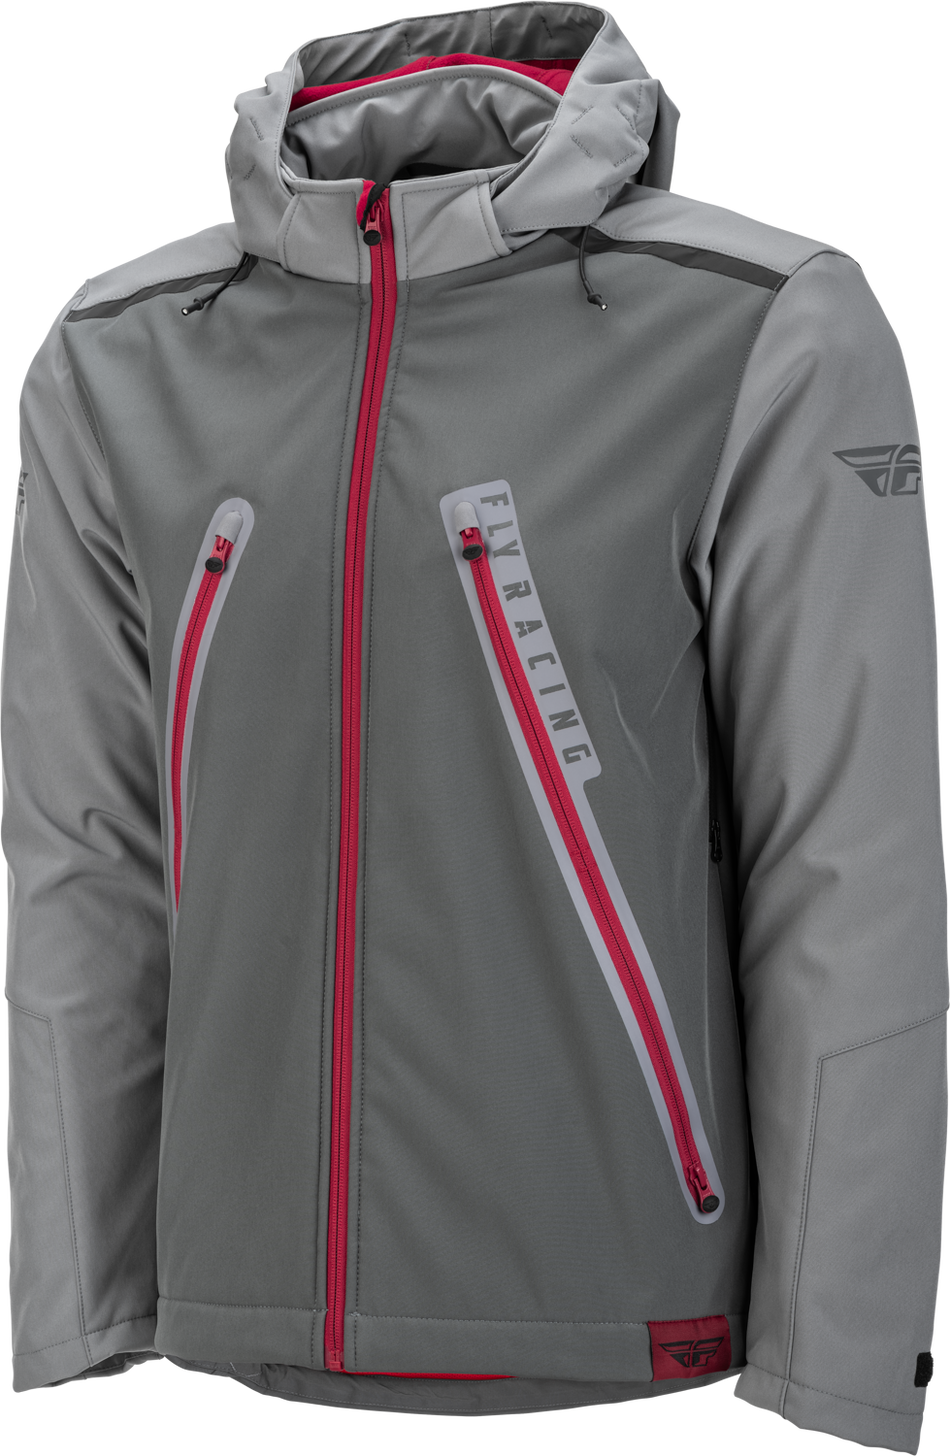 FLY RACING Carbyne Jacket Grey/Red Lg 477-4091L